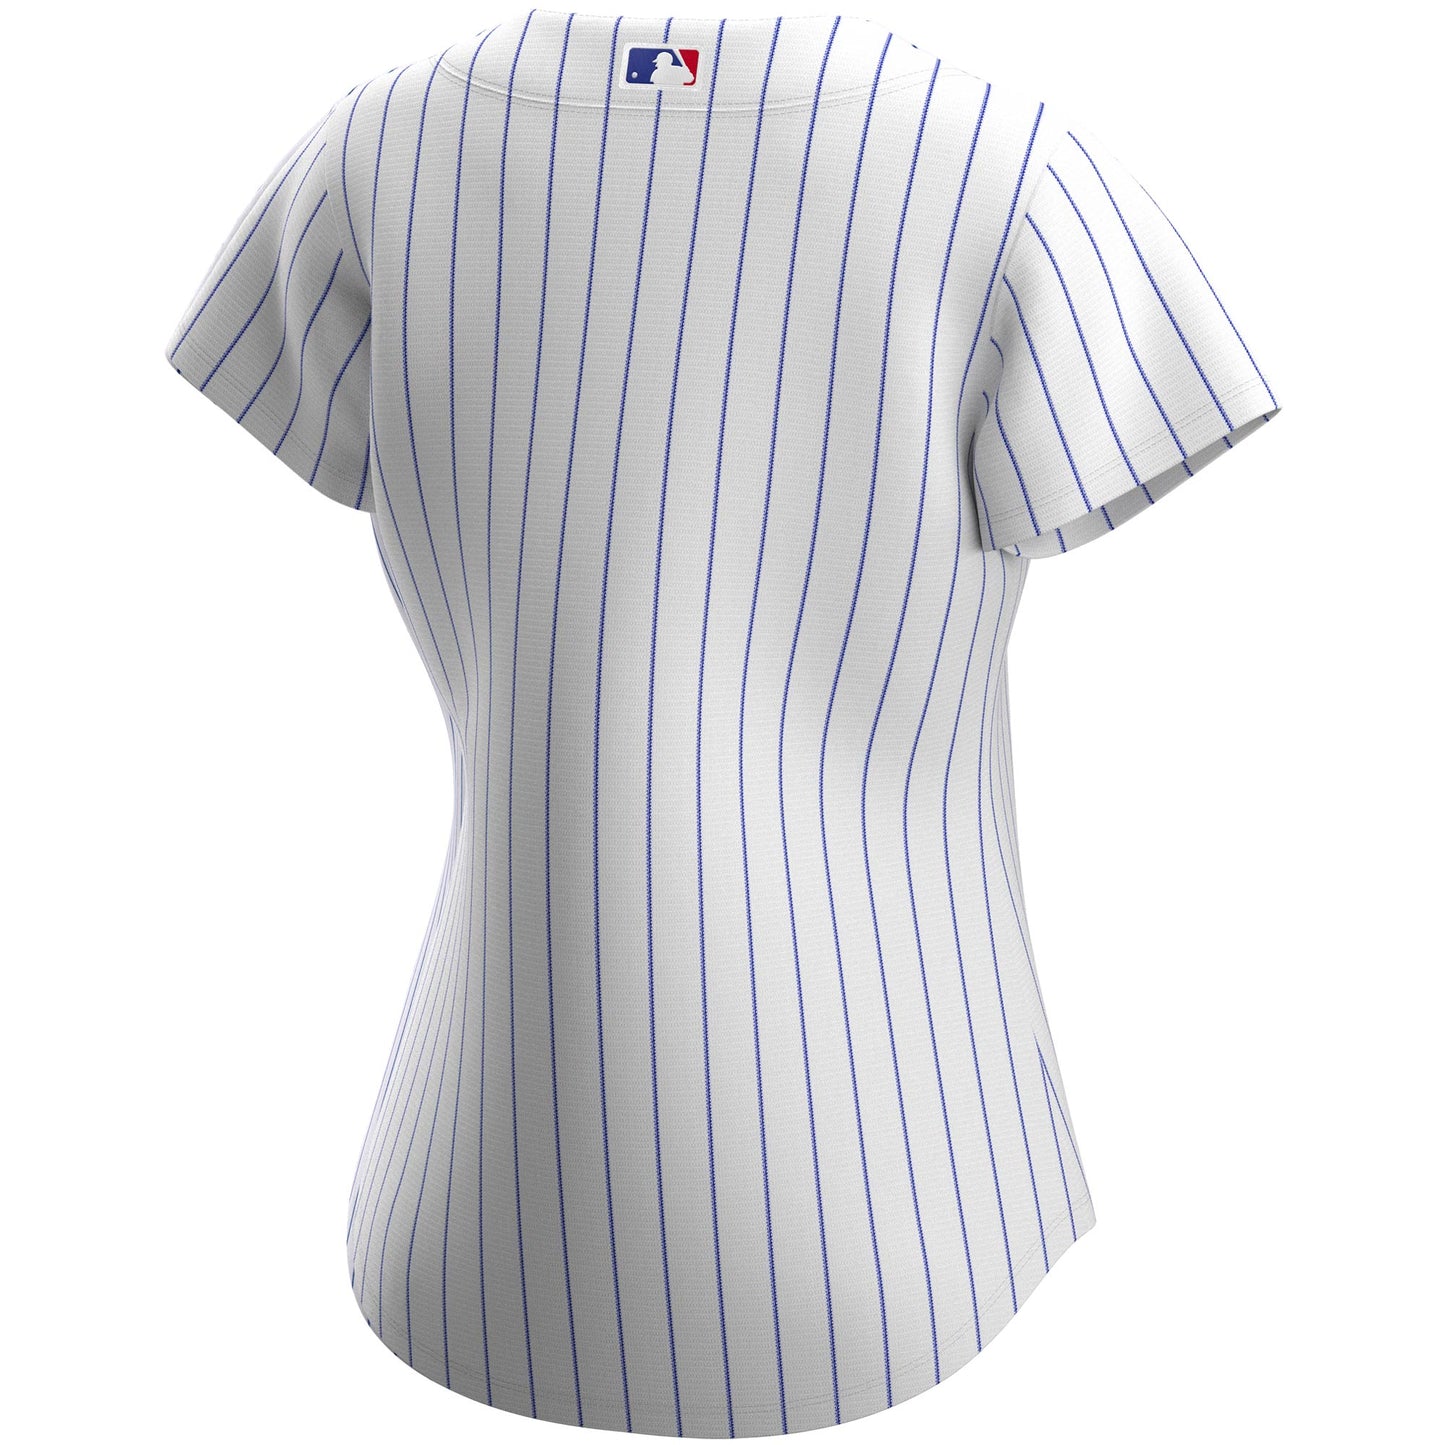 Chicago Cubs Nike Women's Blank Replica Home Jersey